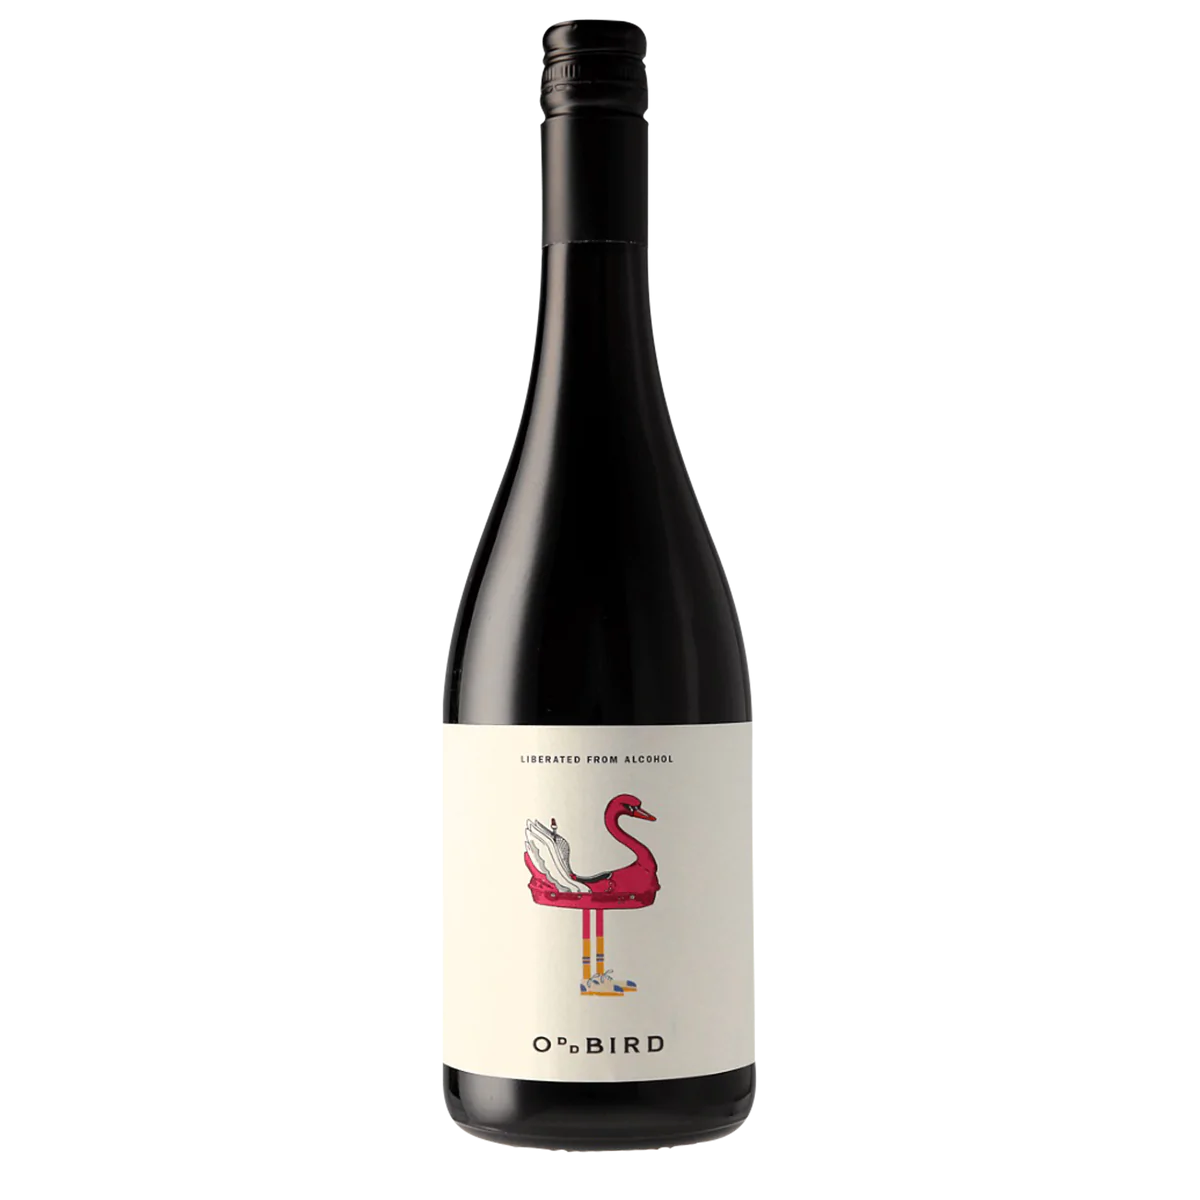 Bottle of non-alcoholic red wine Low Intervention Organic Red No 1 by Oddbird